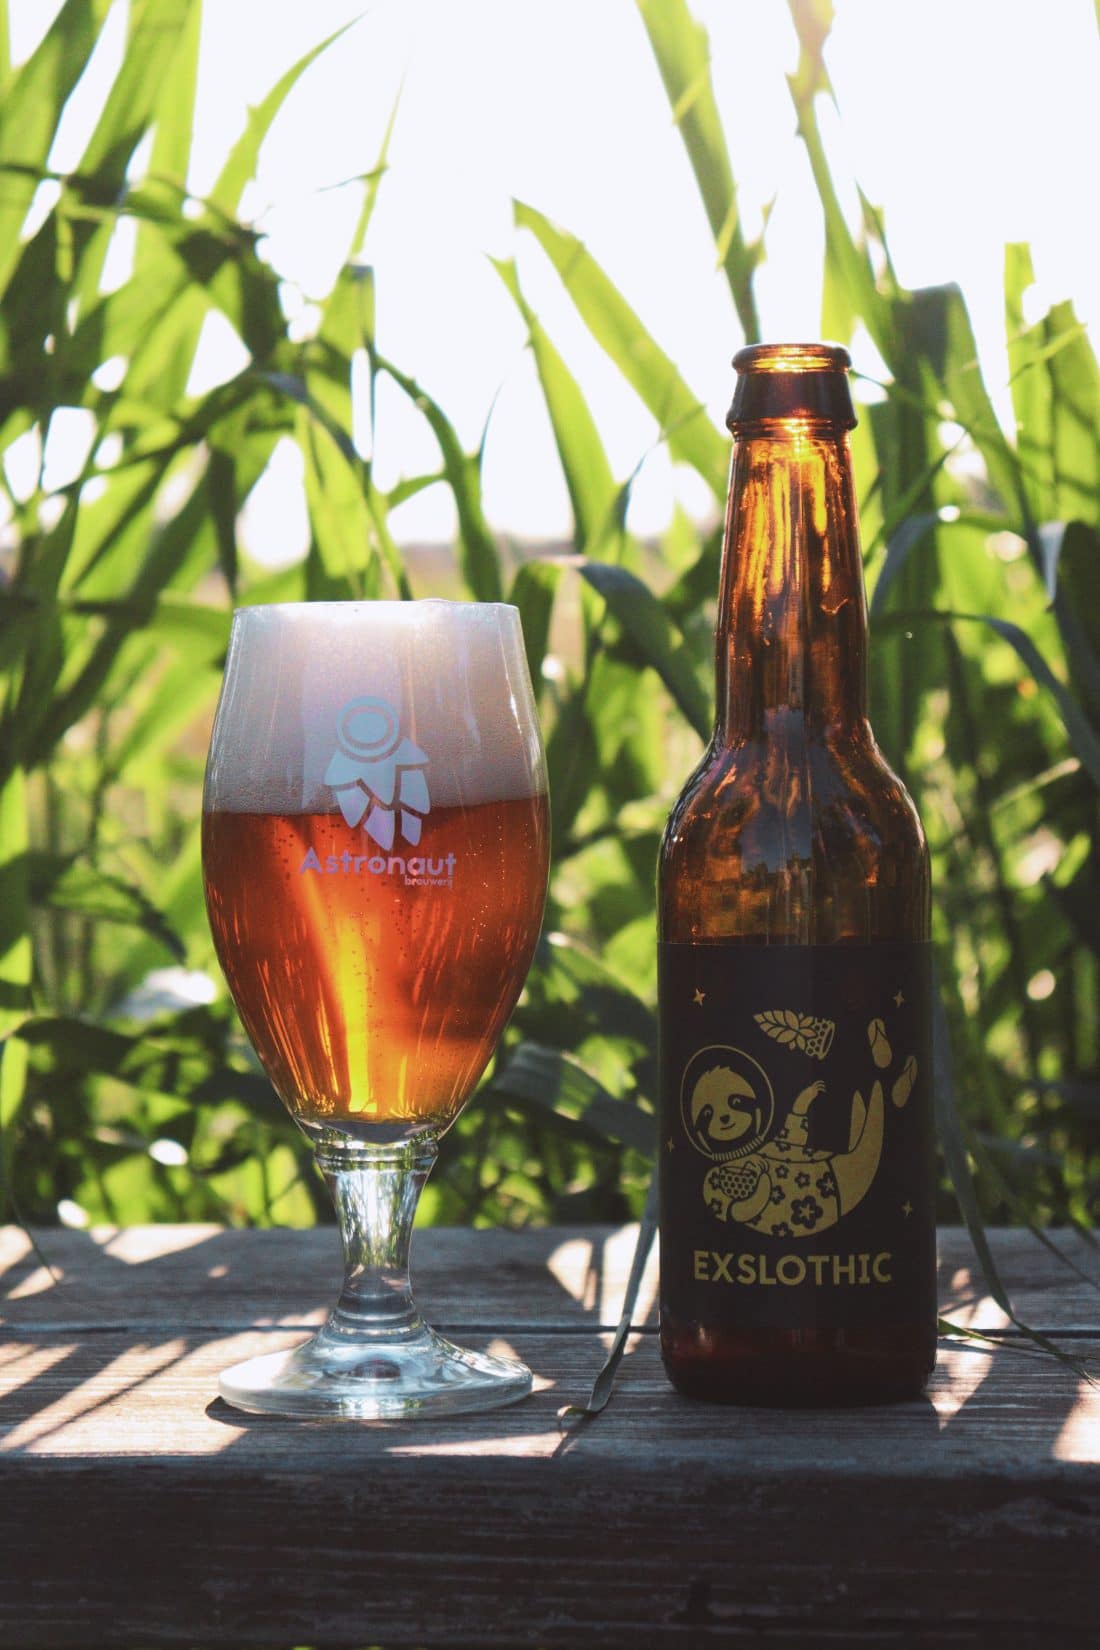 Celebrate summer with a nice blonde Exslothic beer